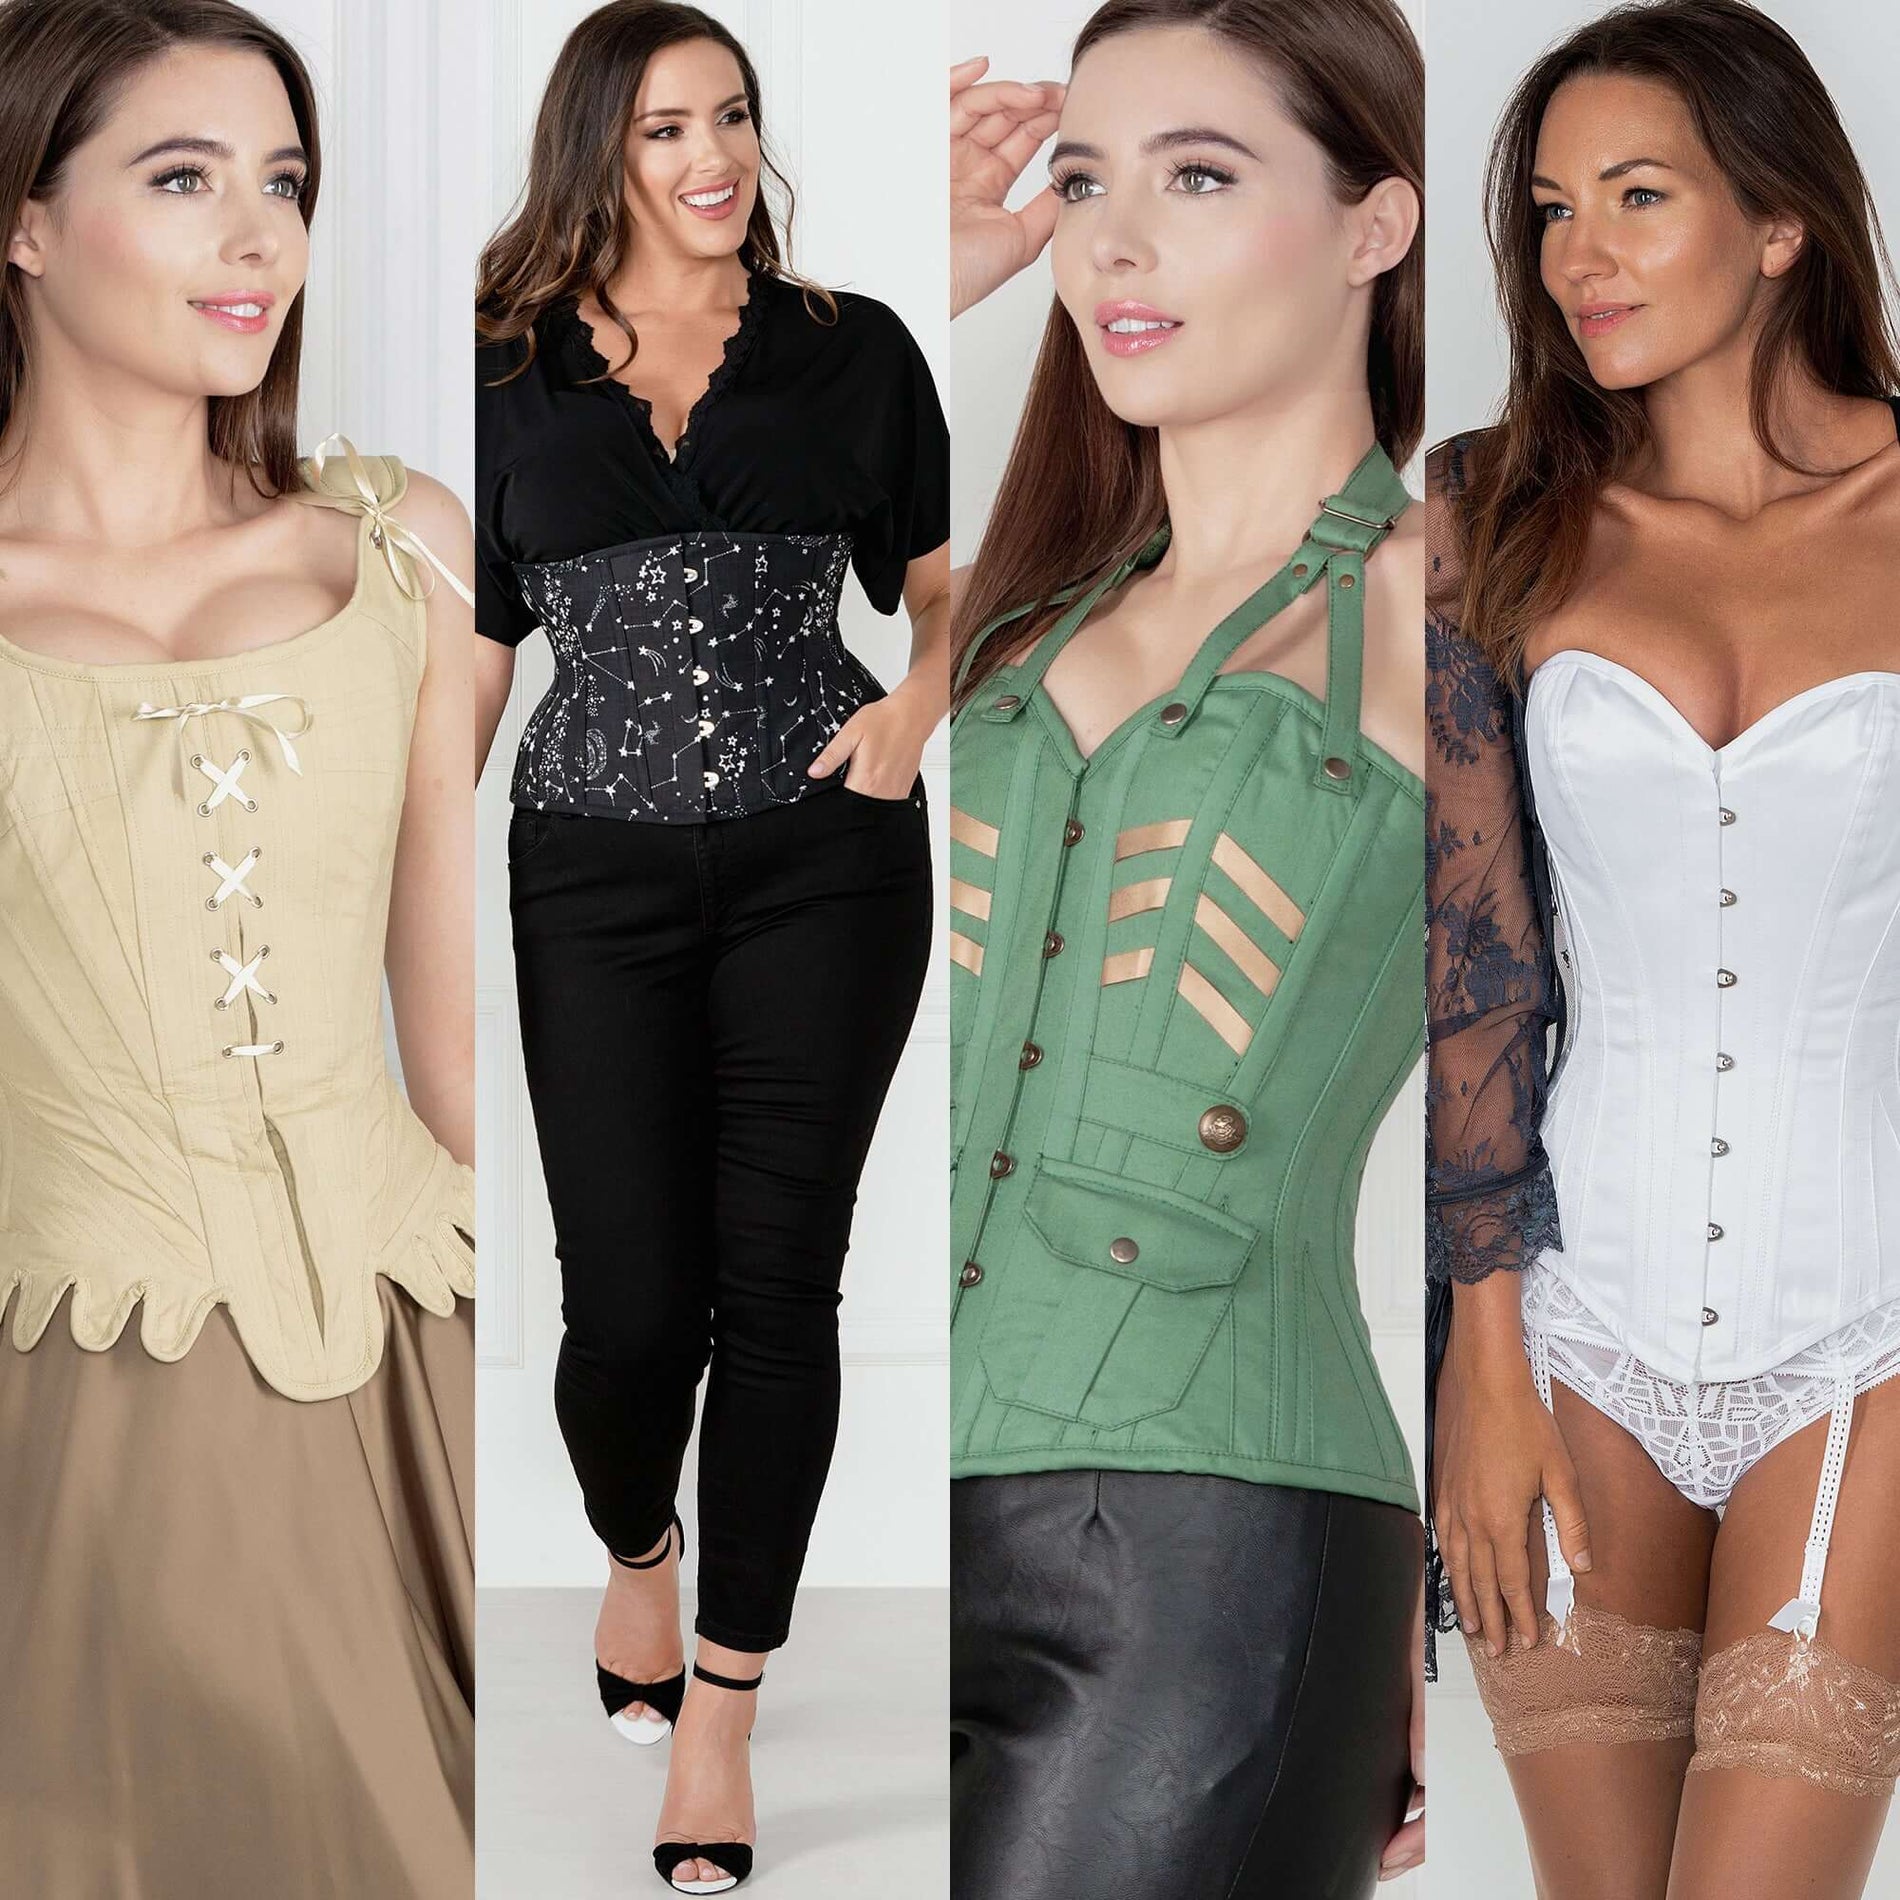 Corsets in the 21st Century: It's all About Choice